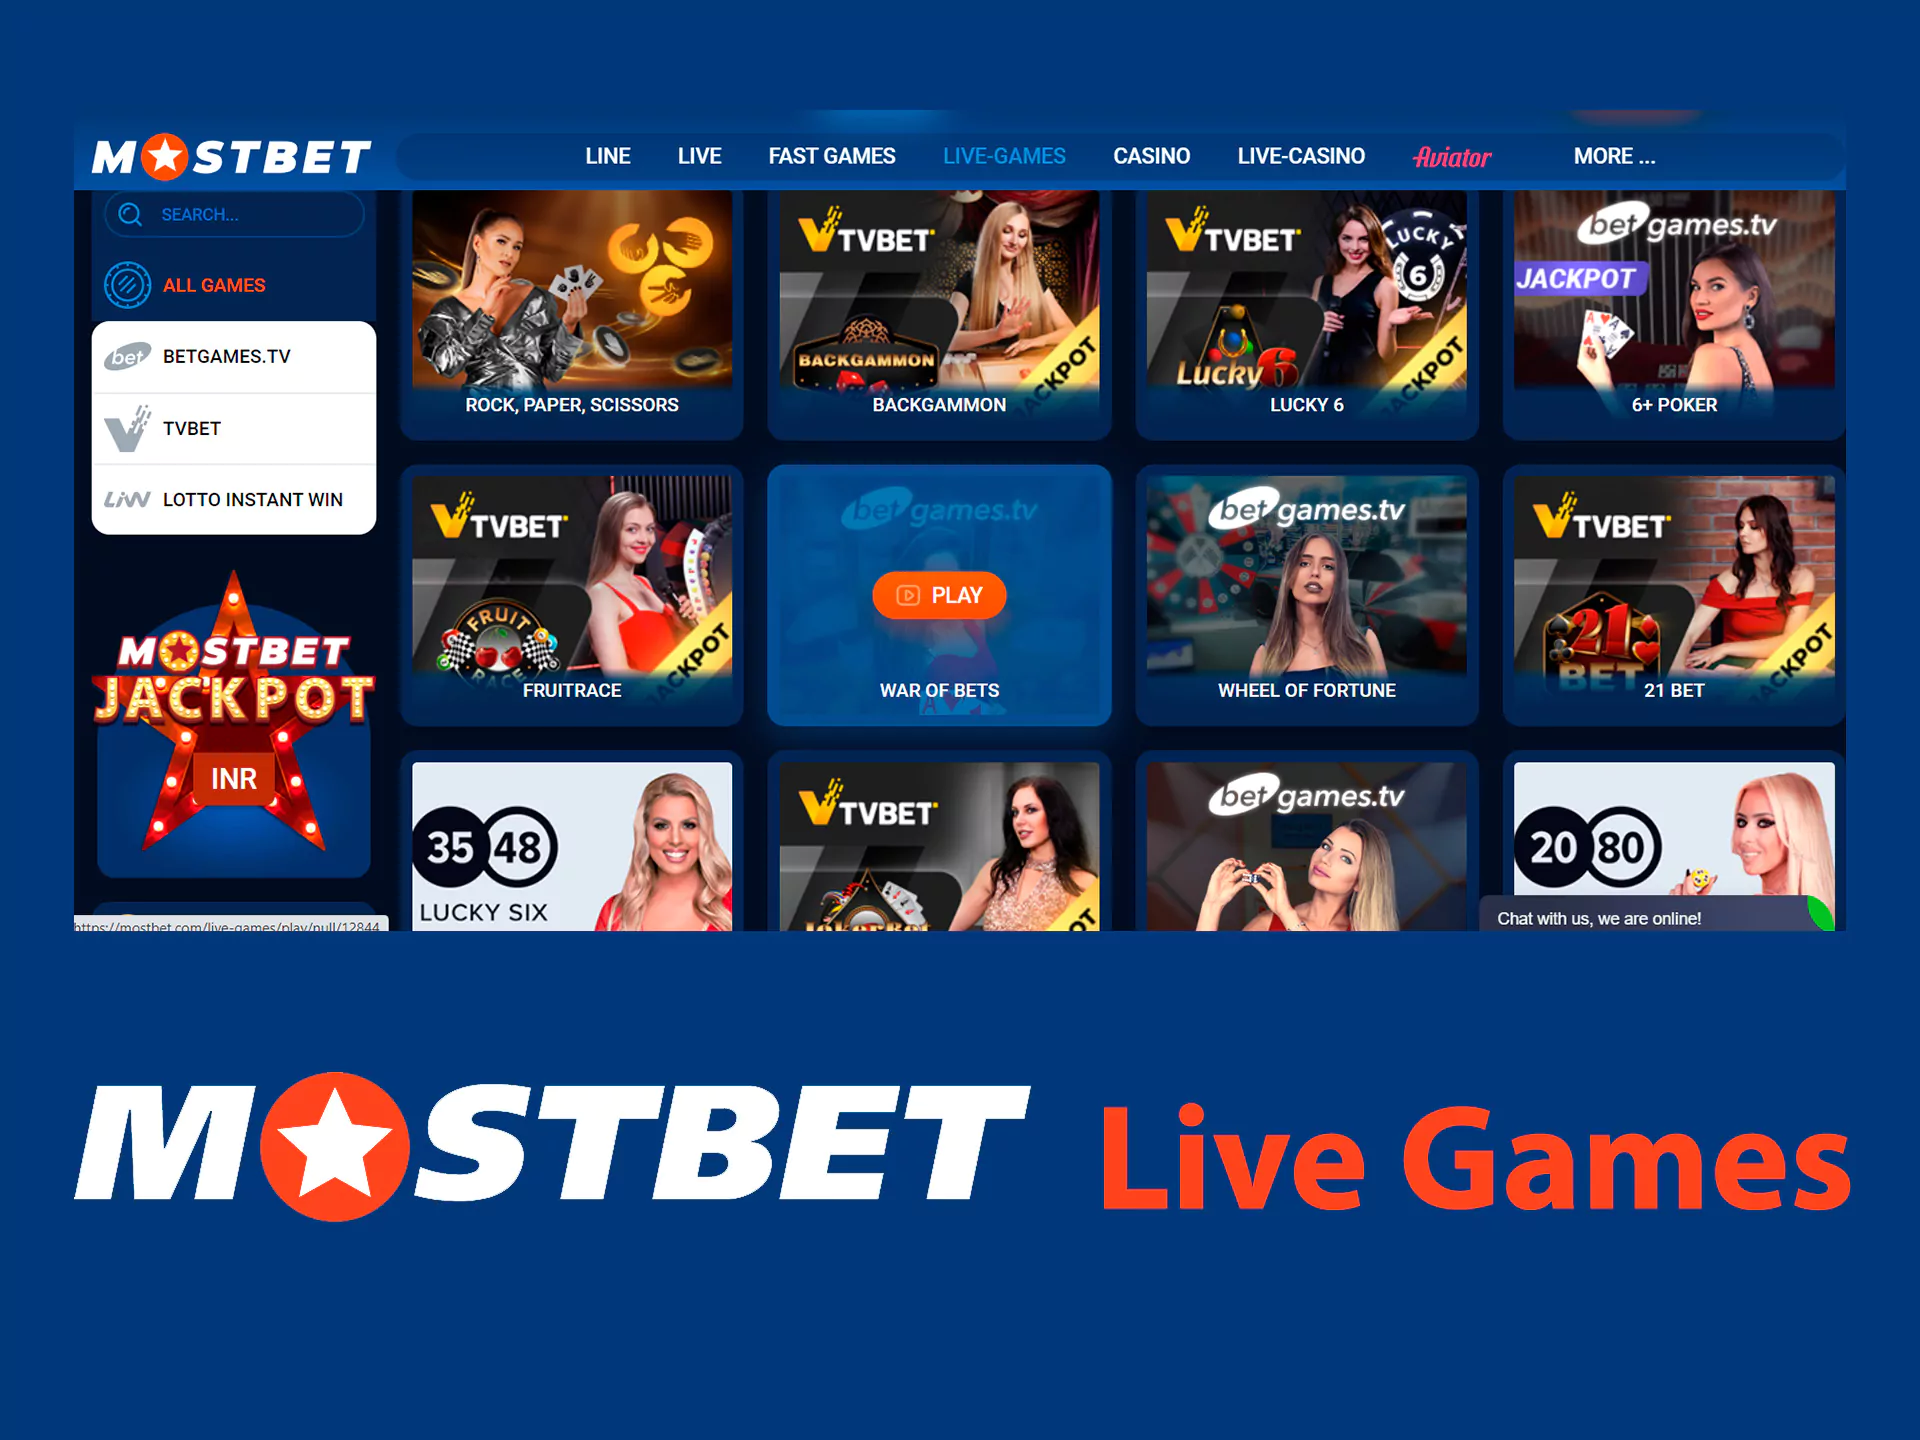 What's Right About Официальный сайт Mostbet